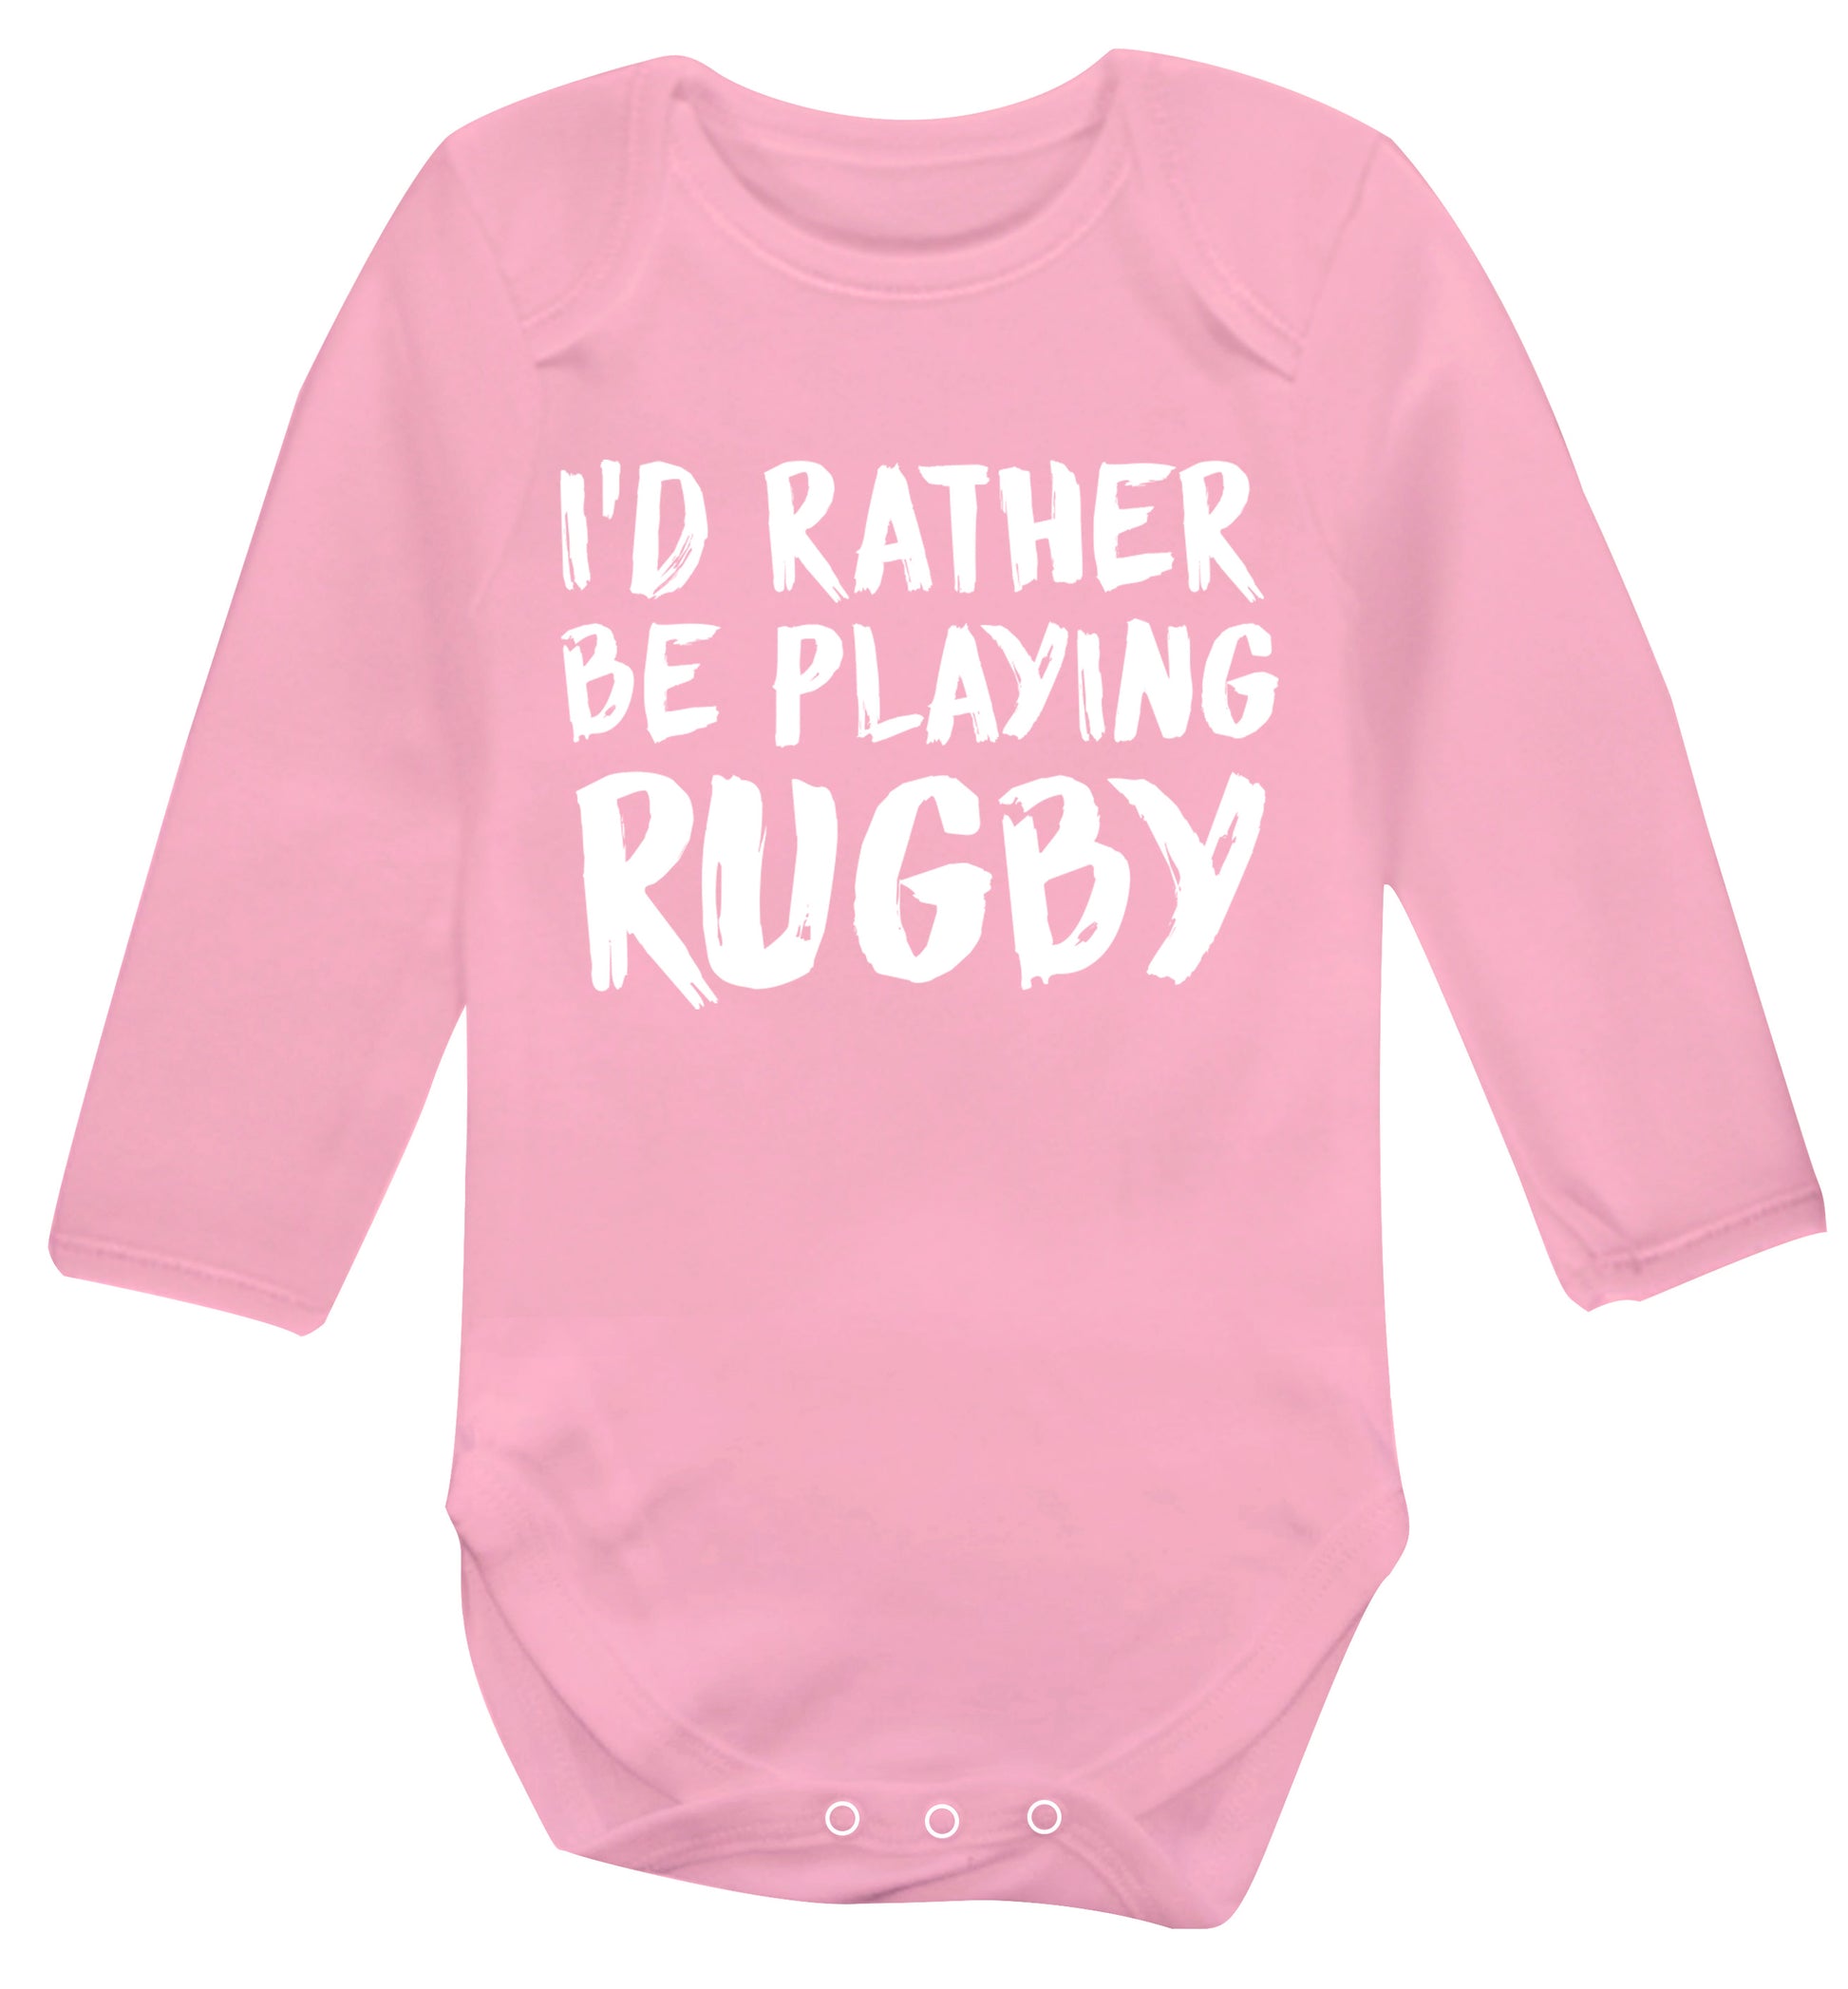 I'd rather be playing rugby Baby Vest long sleeved pale pink 6-12 months